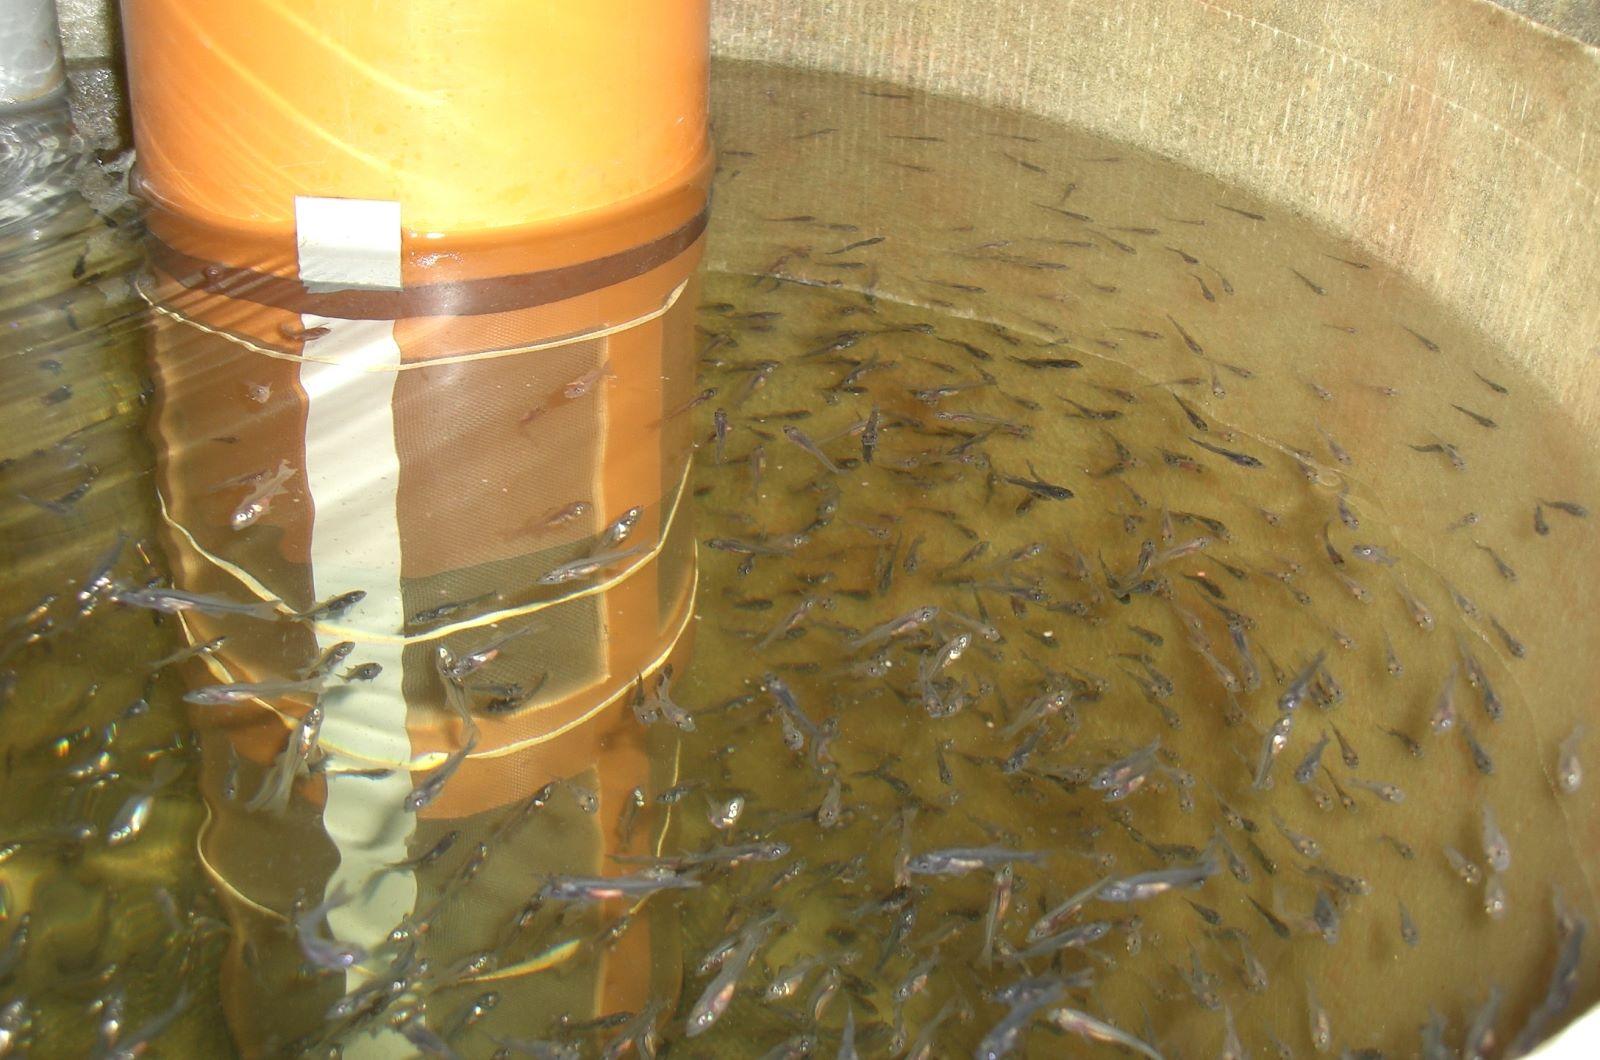 The rearing of pikeperch fry using dry food